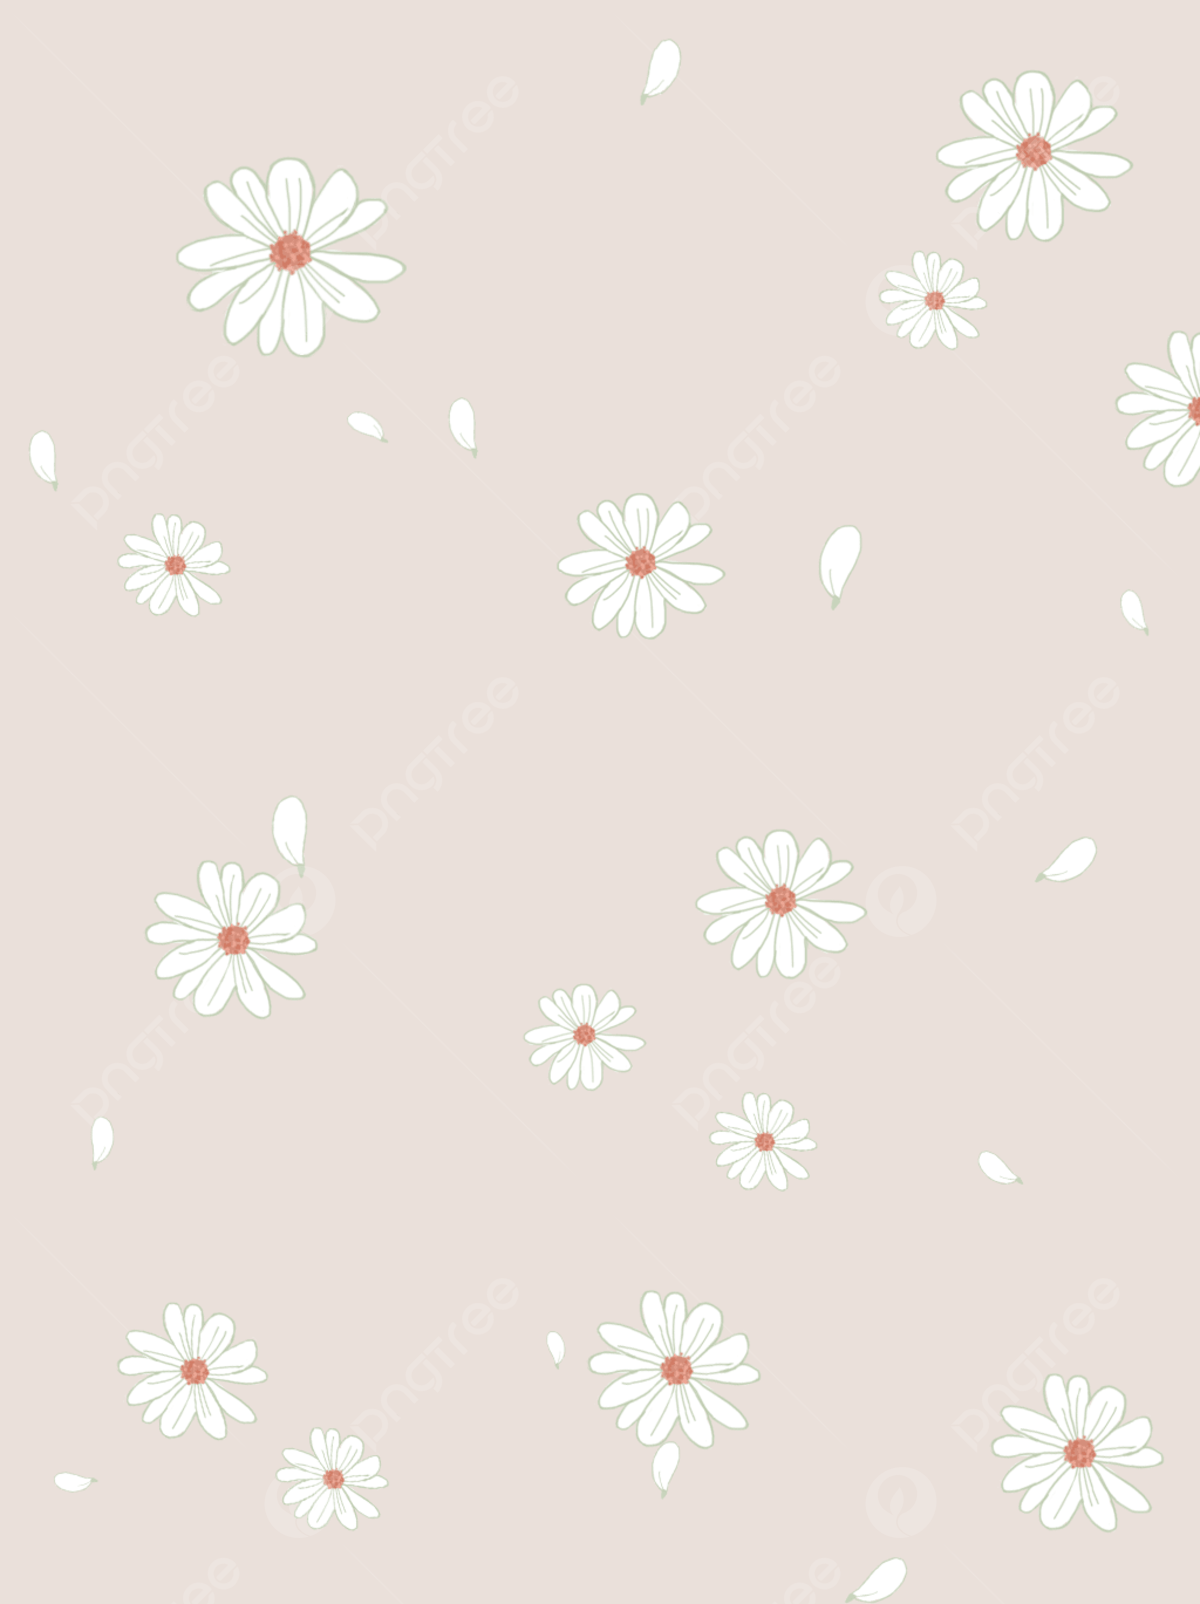 Daisy Wallpaper Background Image, HD Picture and Wallpaper For Free Download